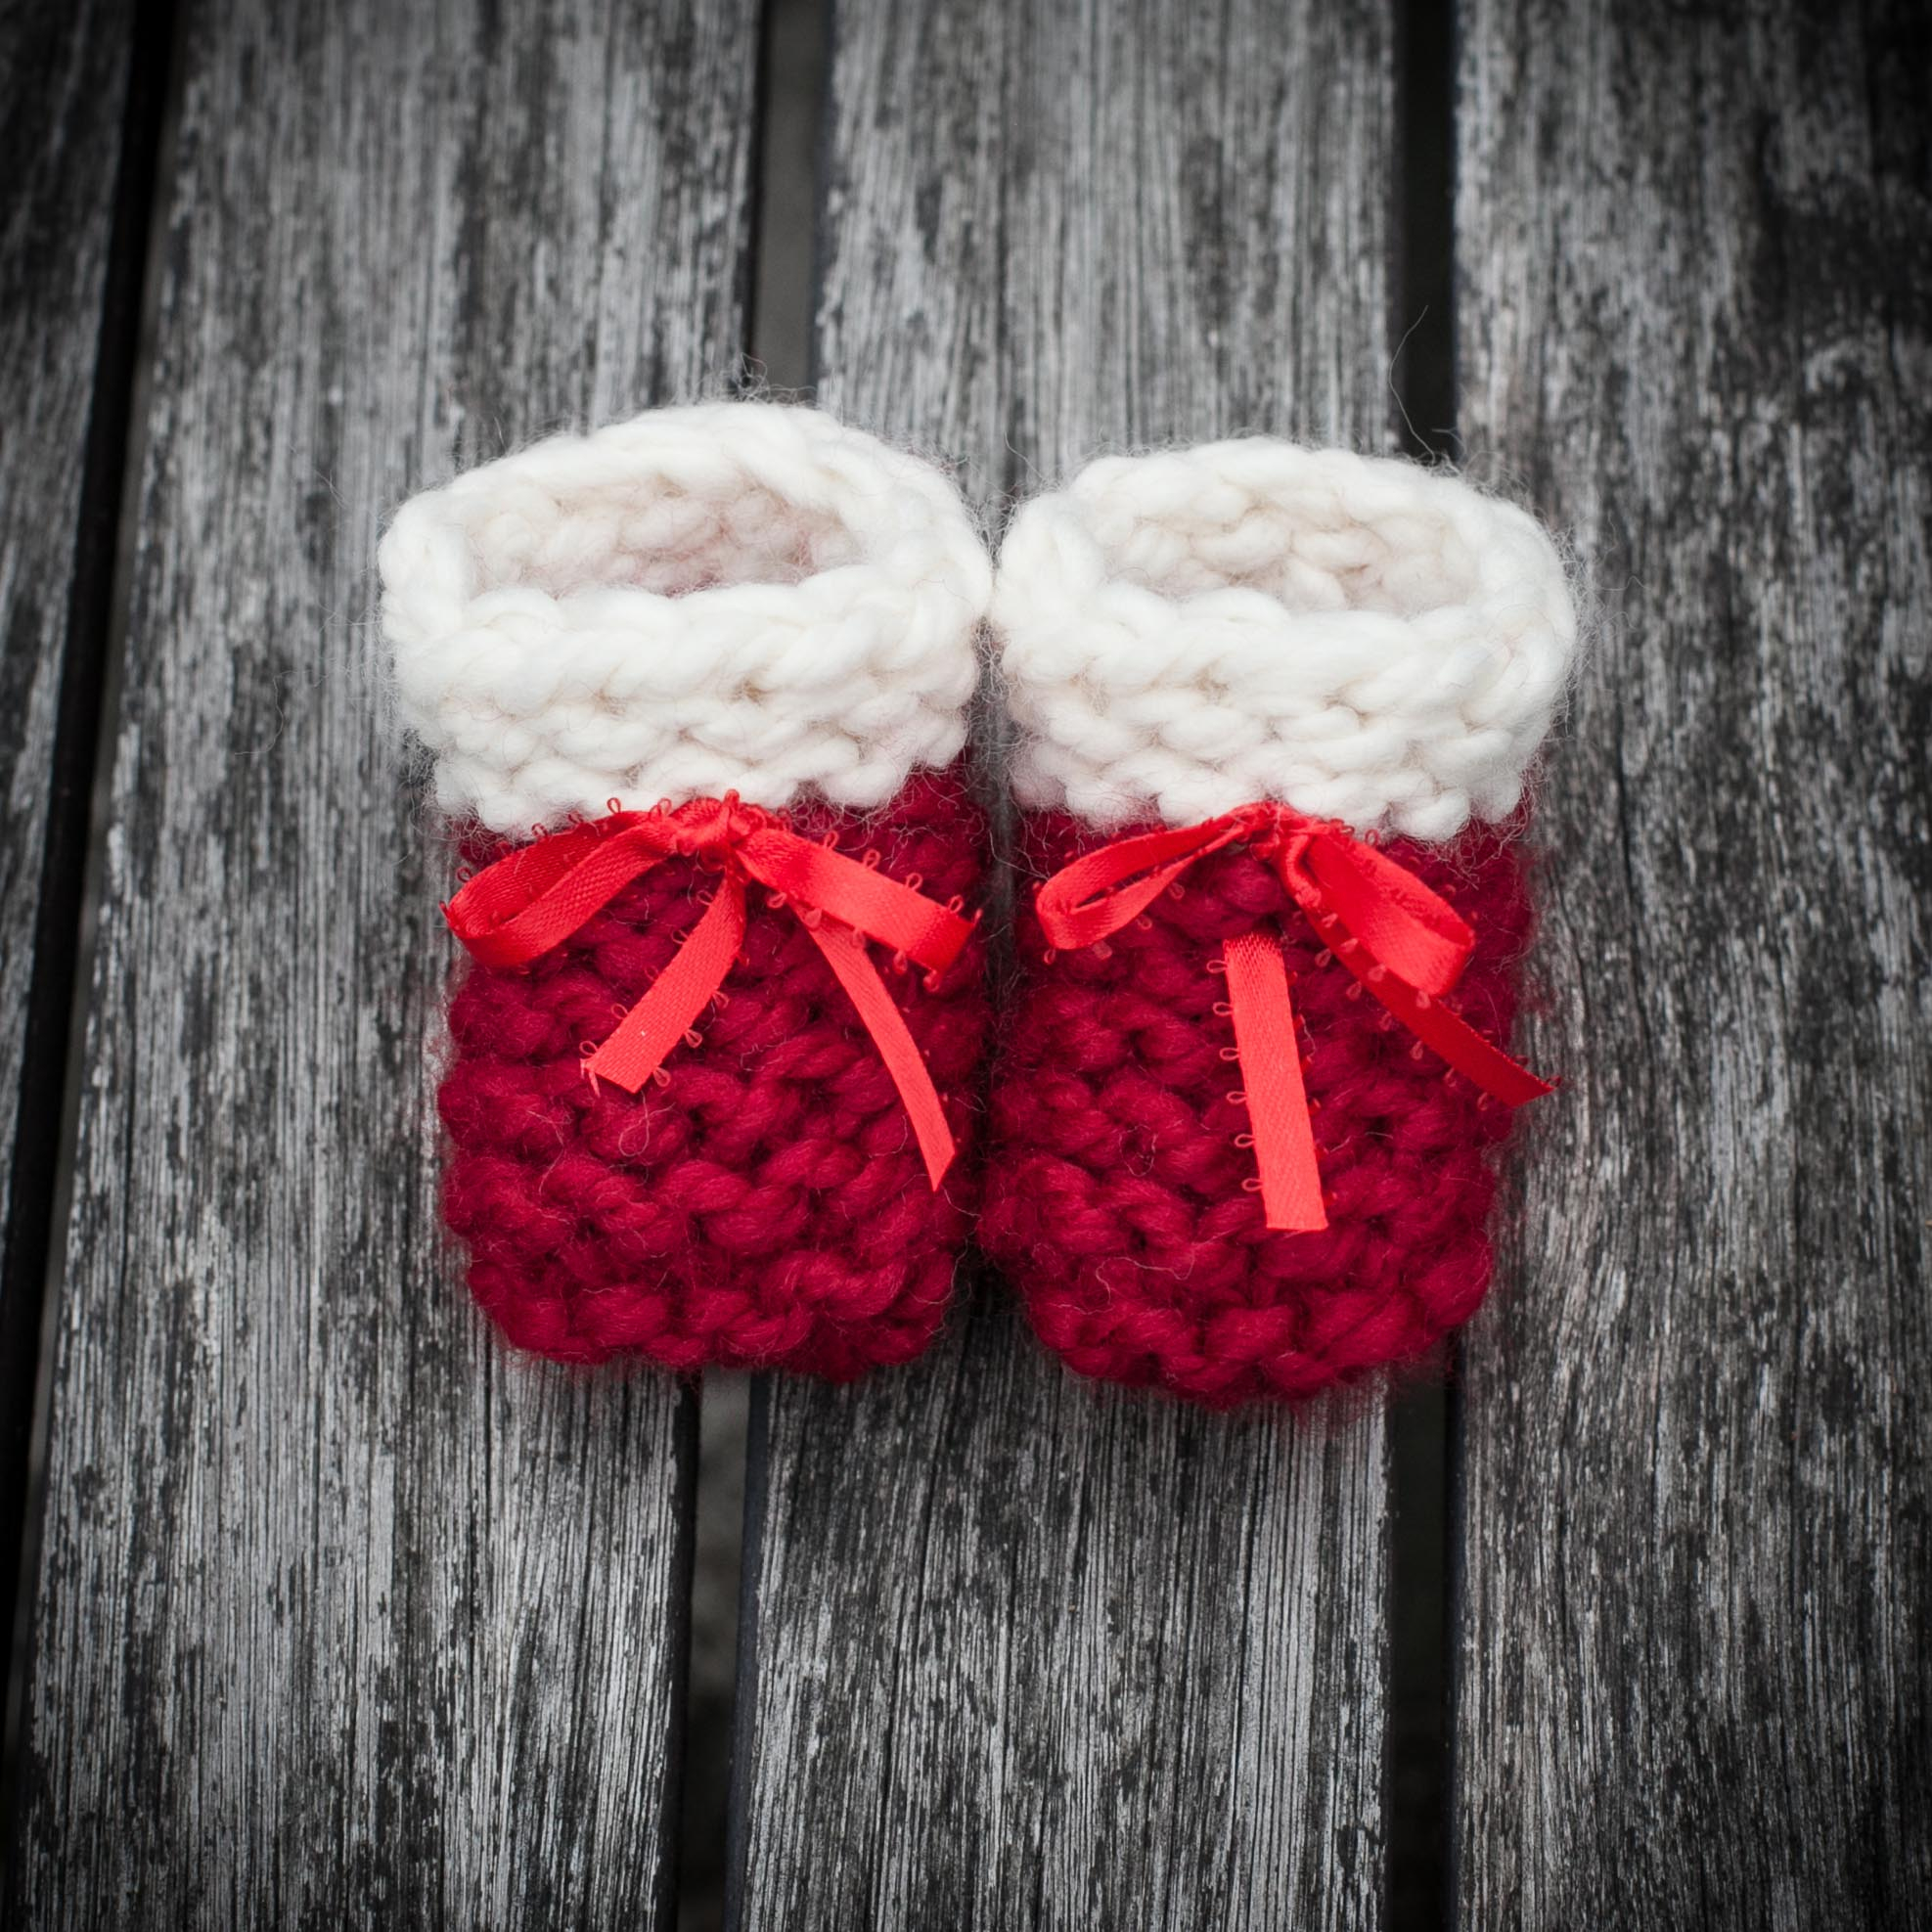 Baby Booties Pattern Knit Loom Knit Ba Booties Shoes Pattern Beginner Friendly Garter Stitch Booties 4 Sizes Newborn To 12 Months Pdf Pattern Download